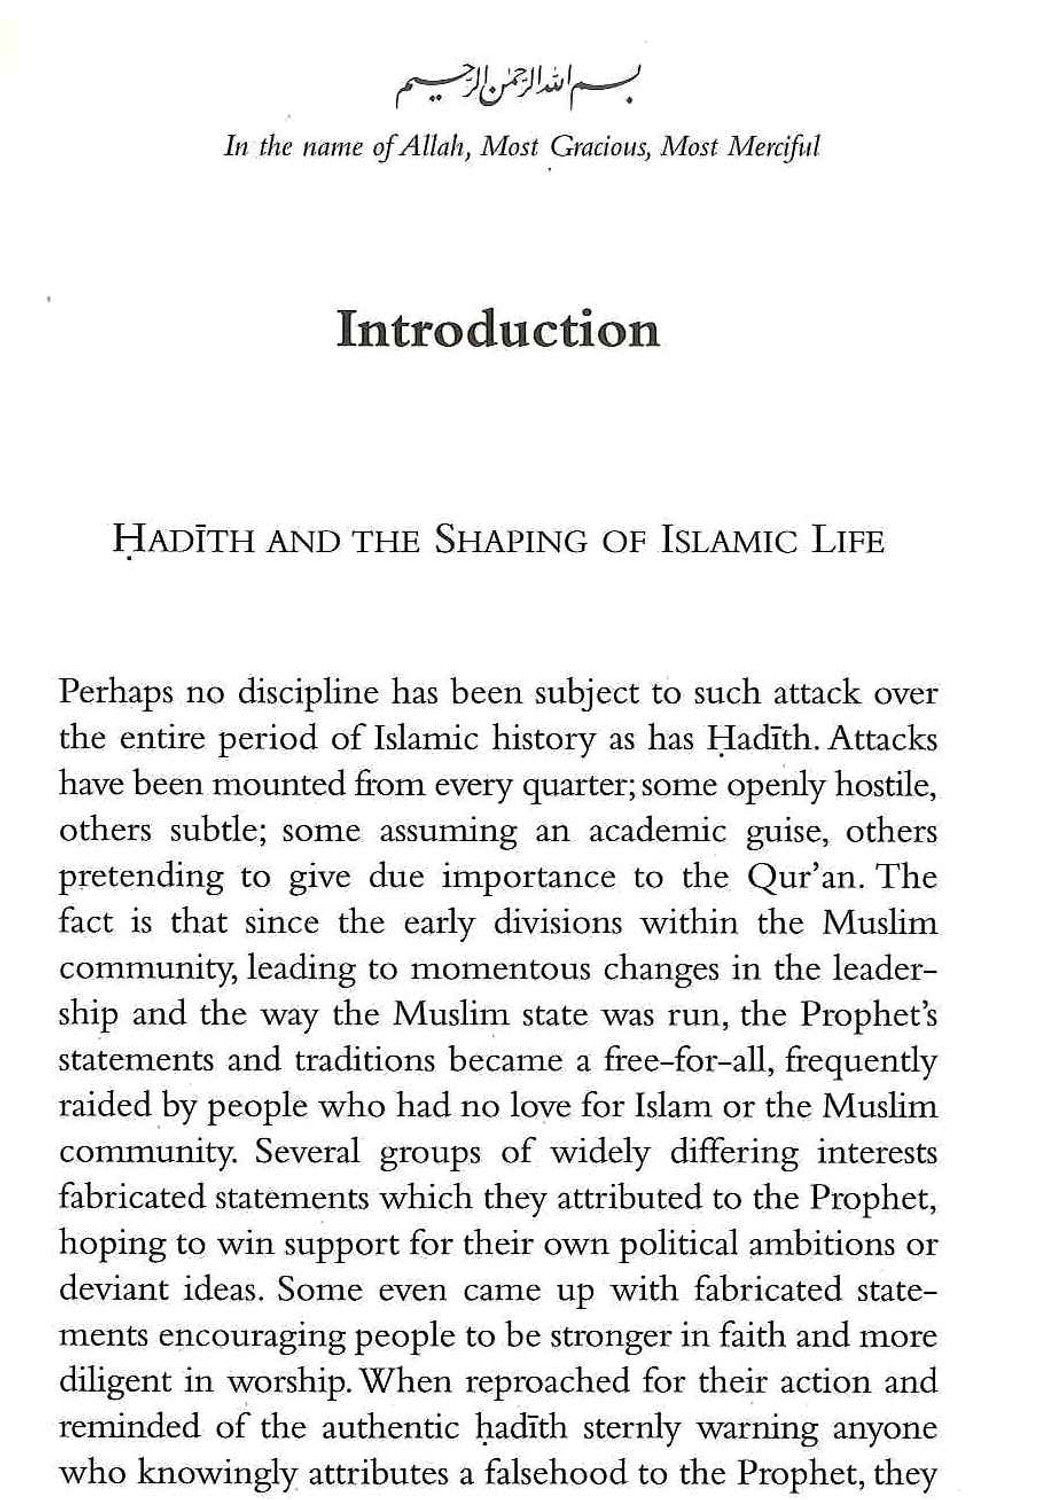 Hadith Status and Role - An Introduction To The Prophet's Tradition